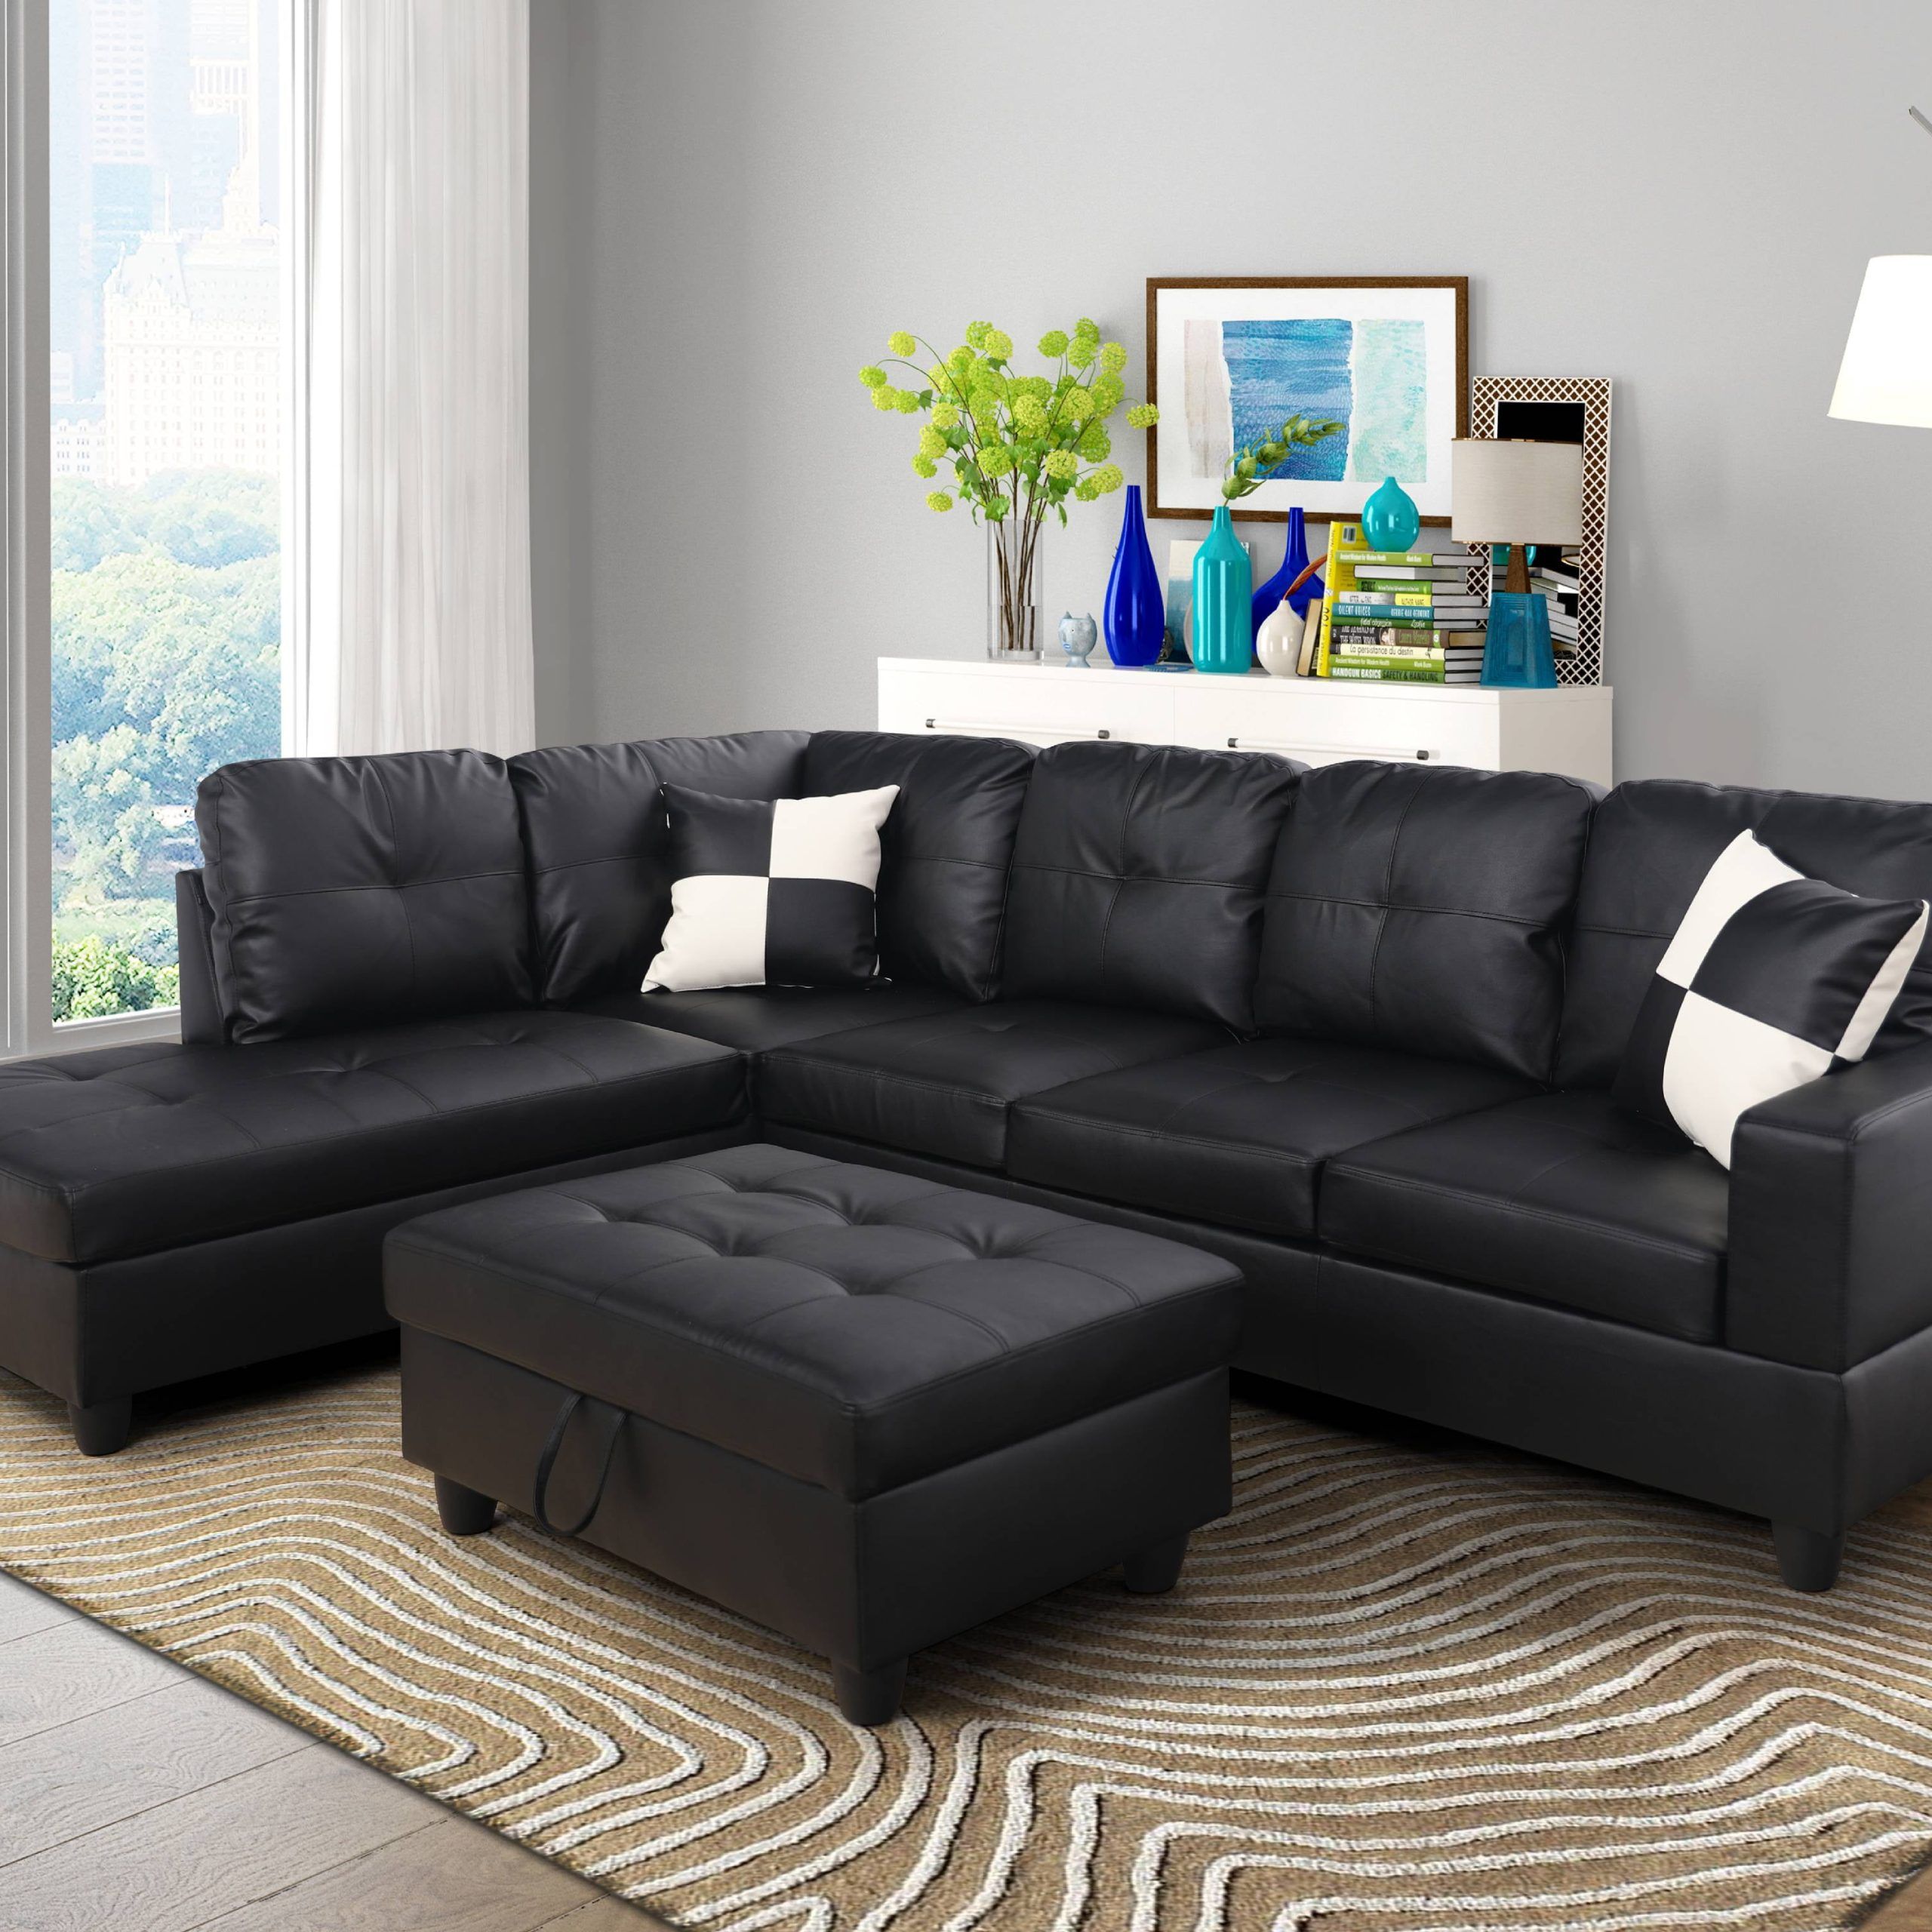 Newest For U Furnishing Classic Black Faux Leather Sectional Sofa, Right With Black Faux Suede Memory Foam Sofas (View 11 of 15)